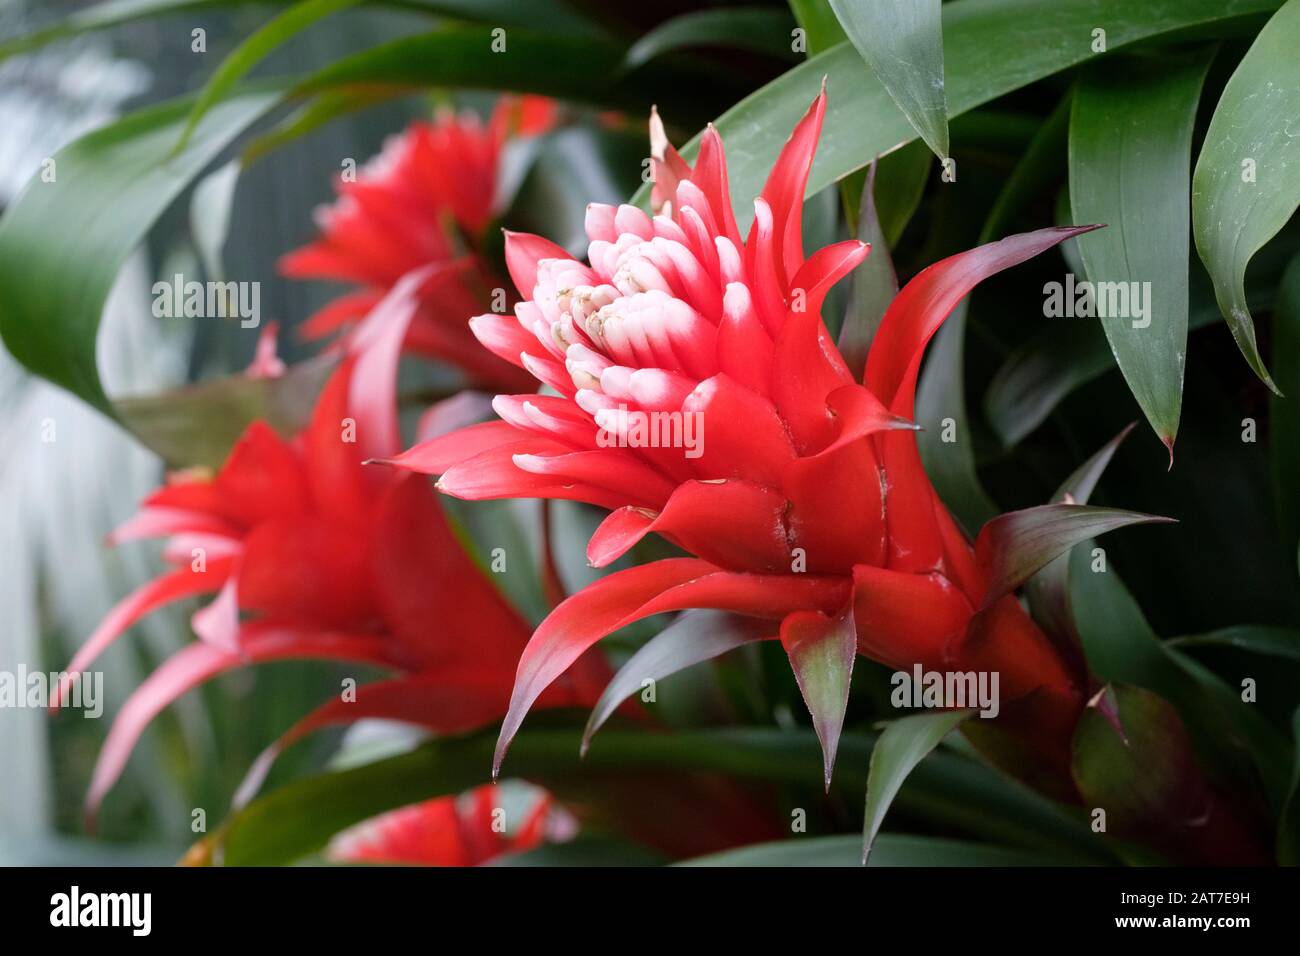 Guzmania Hope 'Durahop' bromeliad, red flowers with white tips Stock Photo